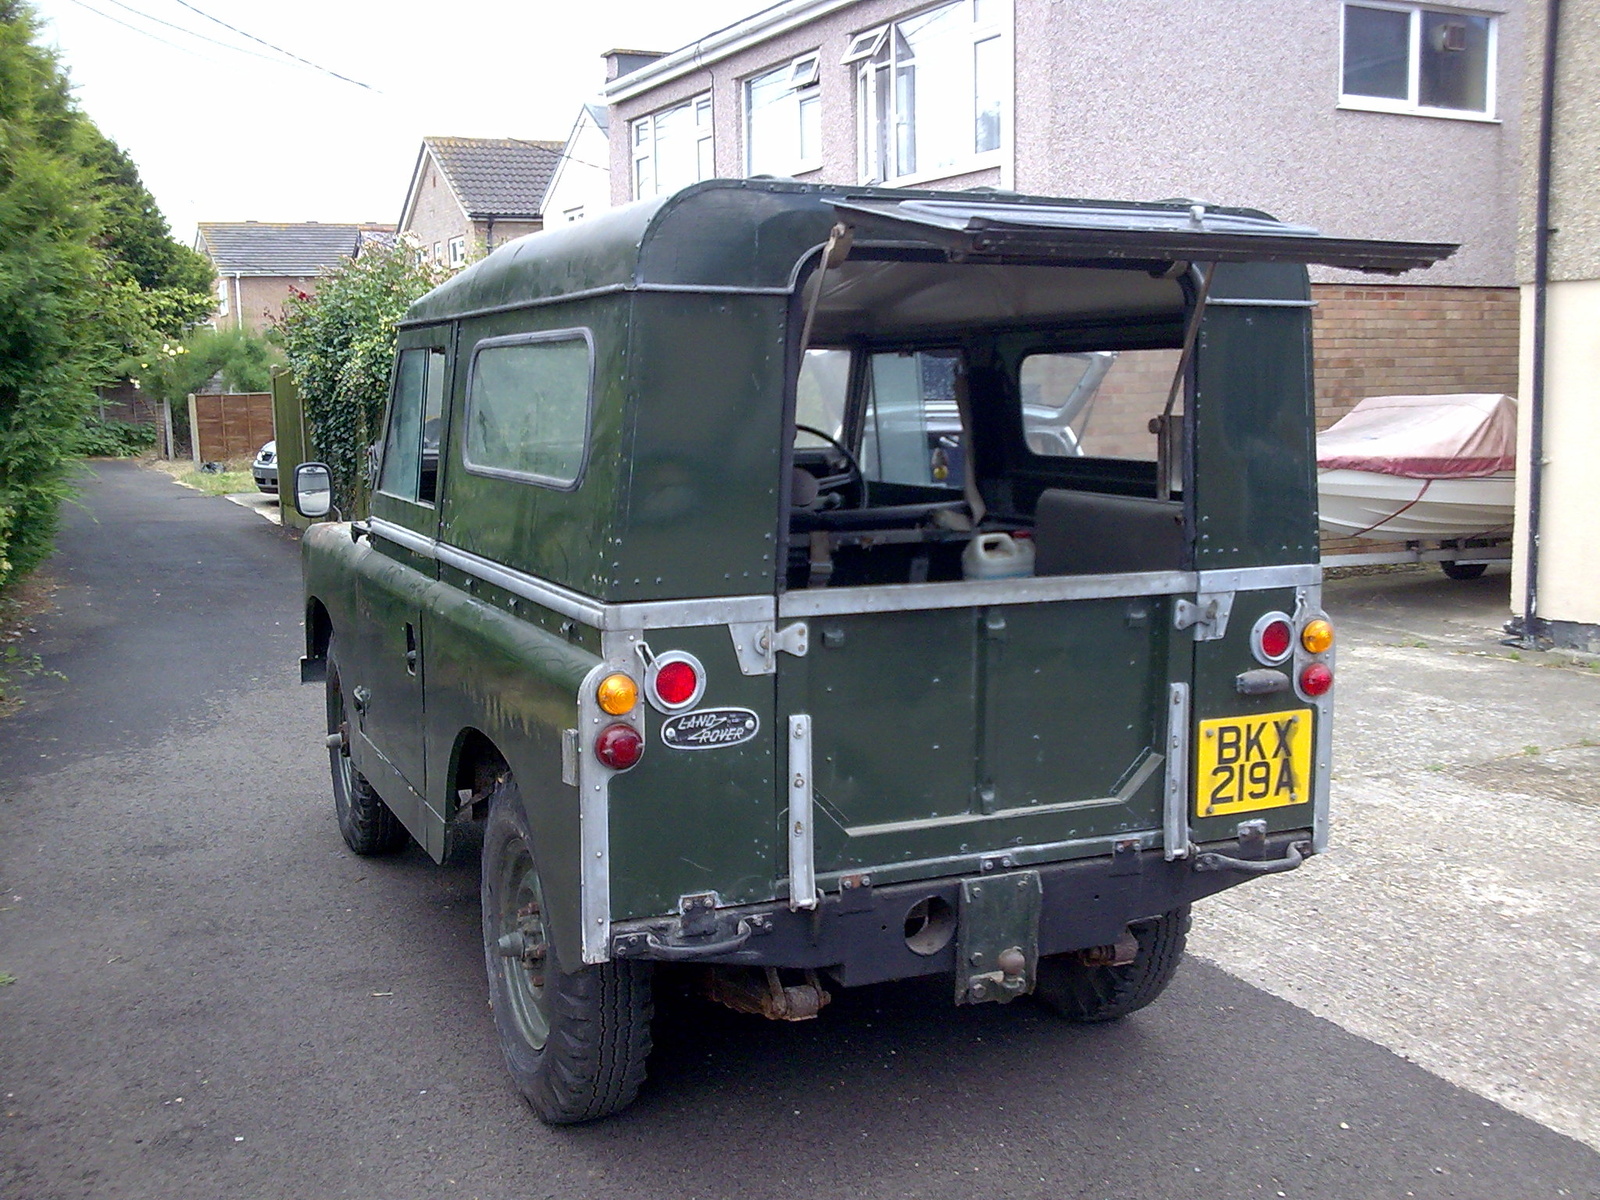 LAND ROVER SERIES II - Review and photos